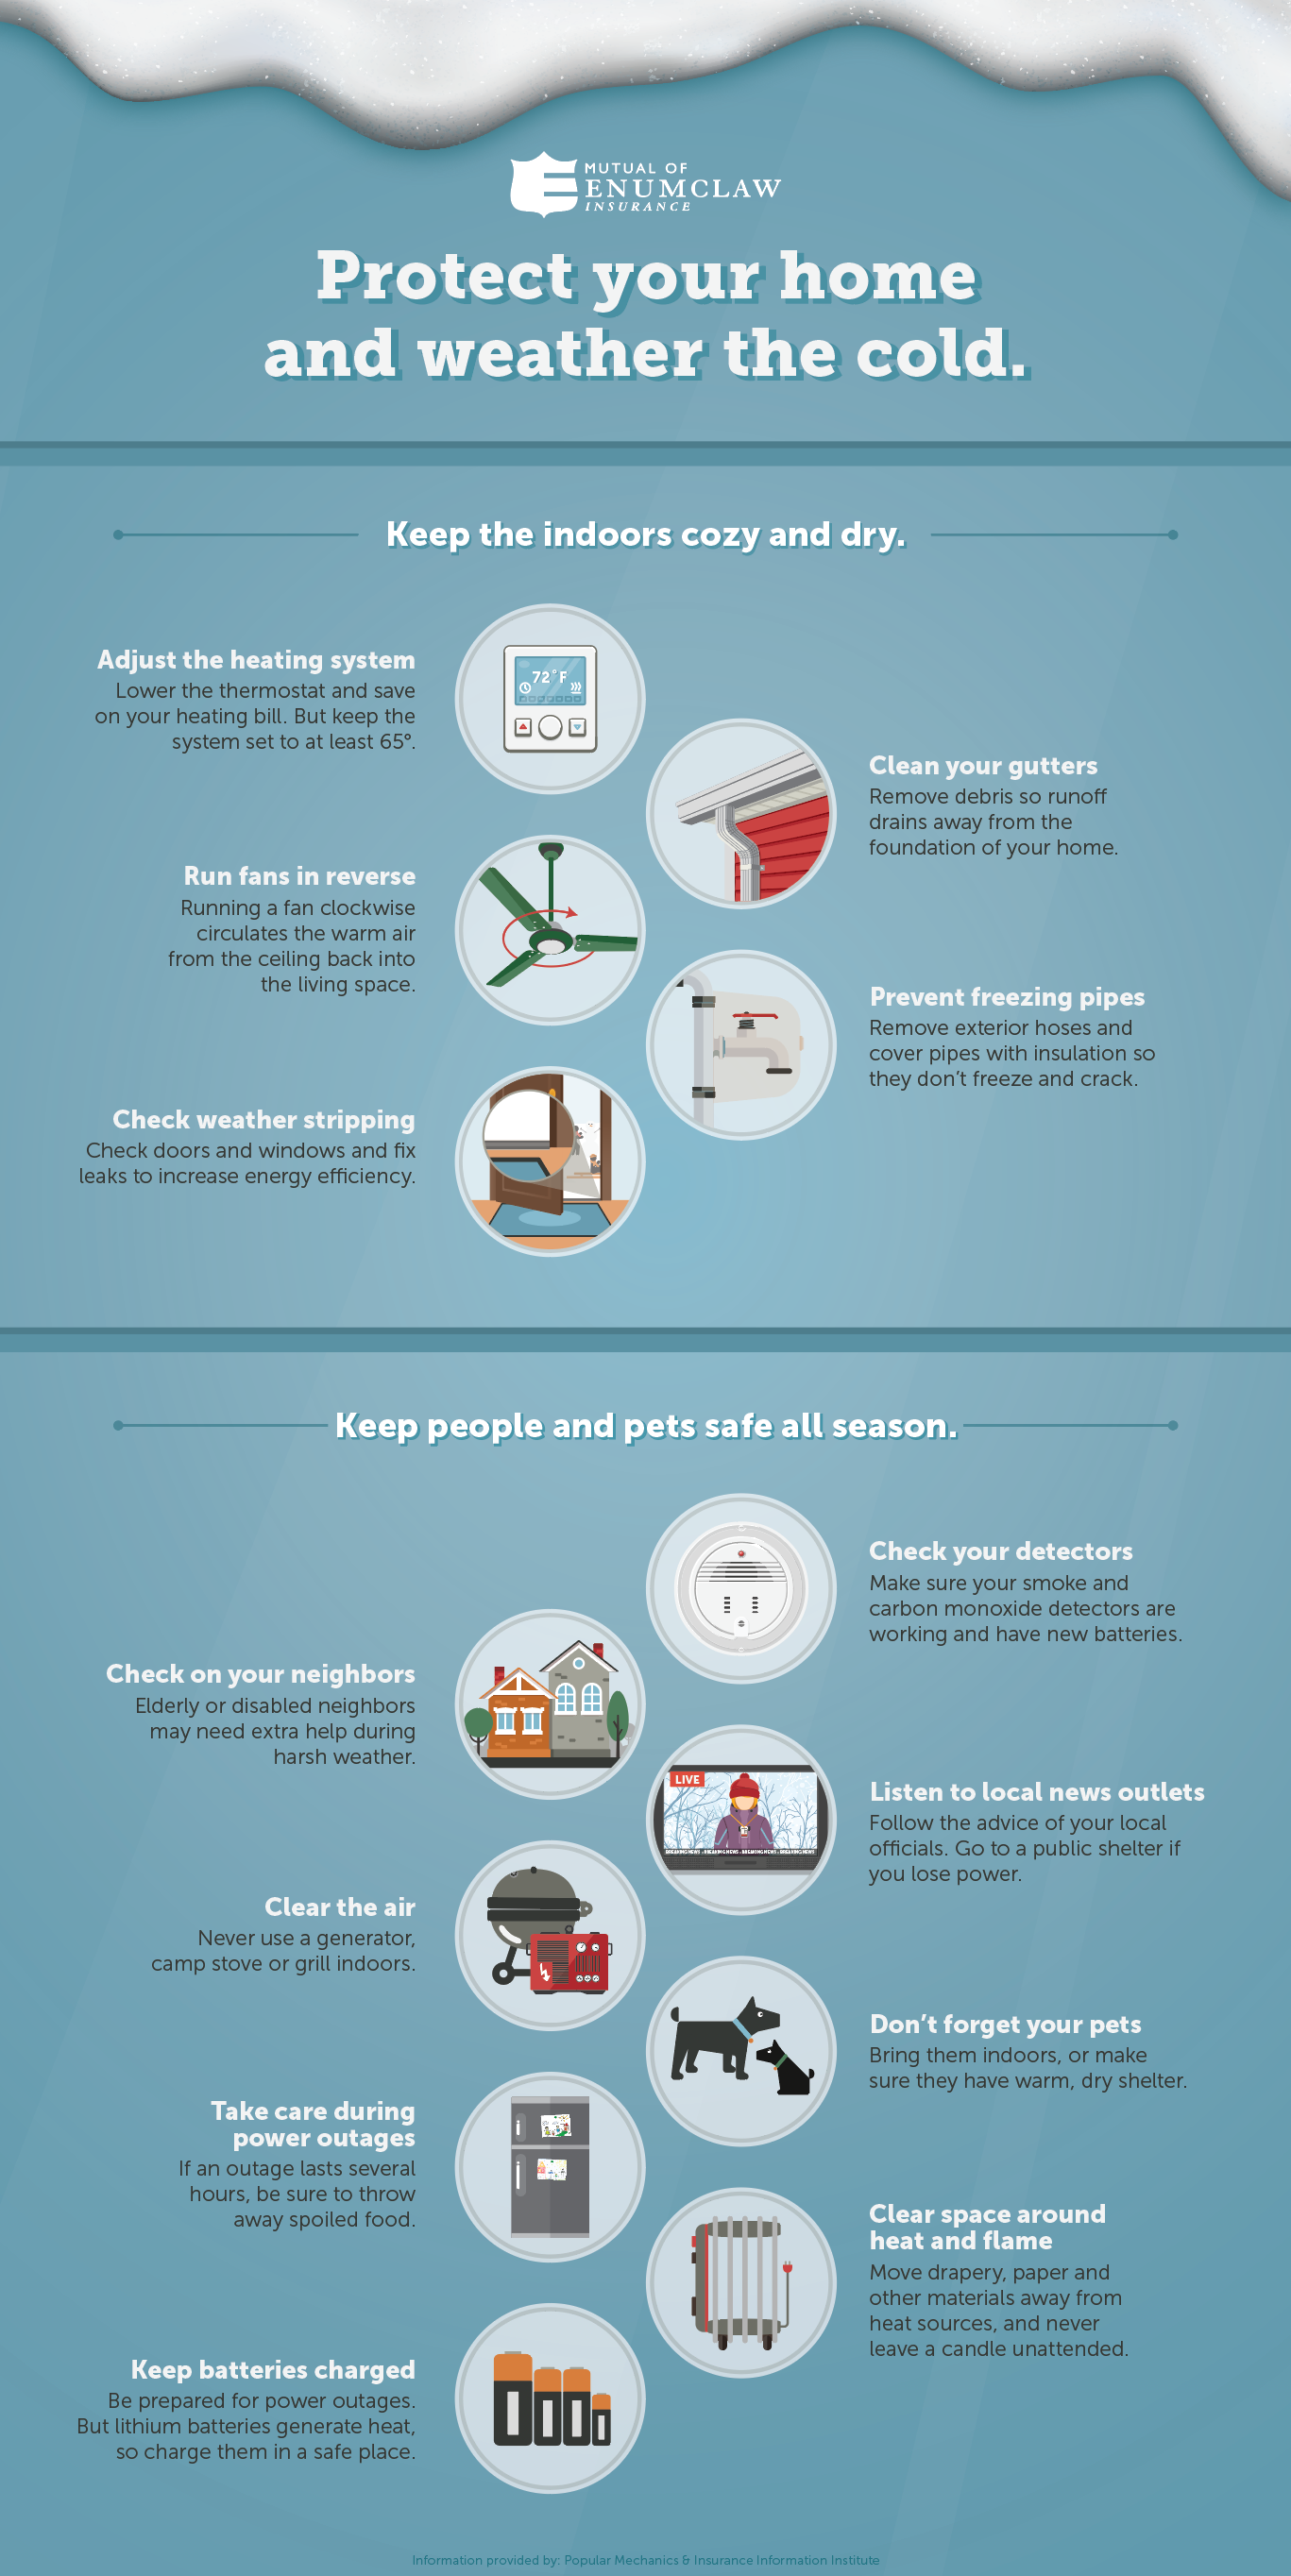 Winter Home Safety Tips Infographic Image - see link below for text-only version